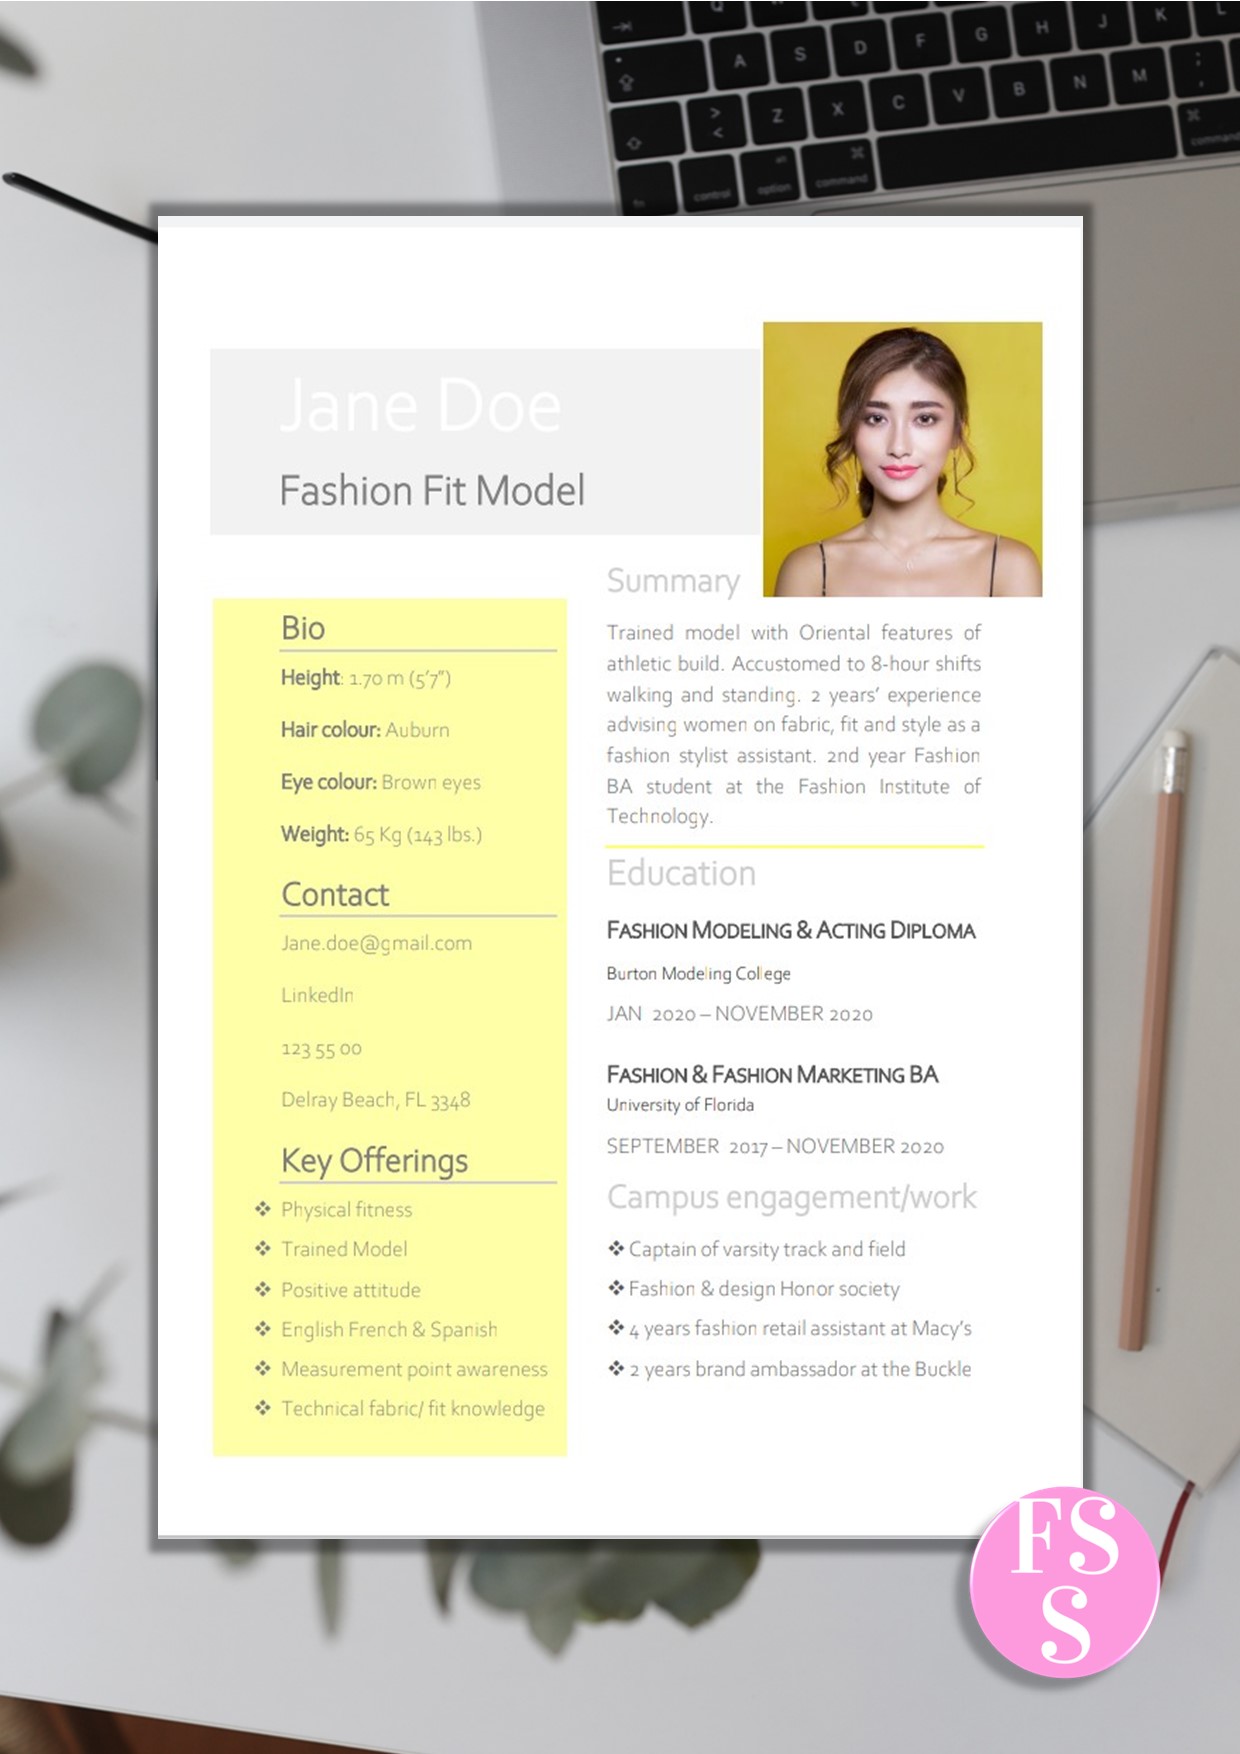 Fashion Model Resume Examples + Template + Matching Cover Letter… Use our creative resume design carefully crafted to blow recruiters away. 